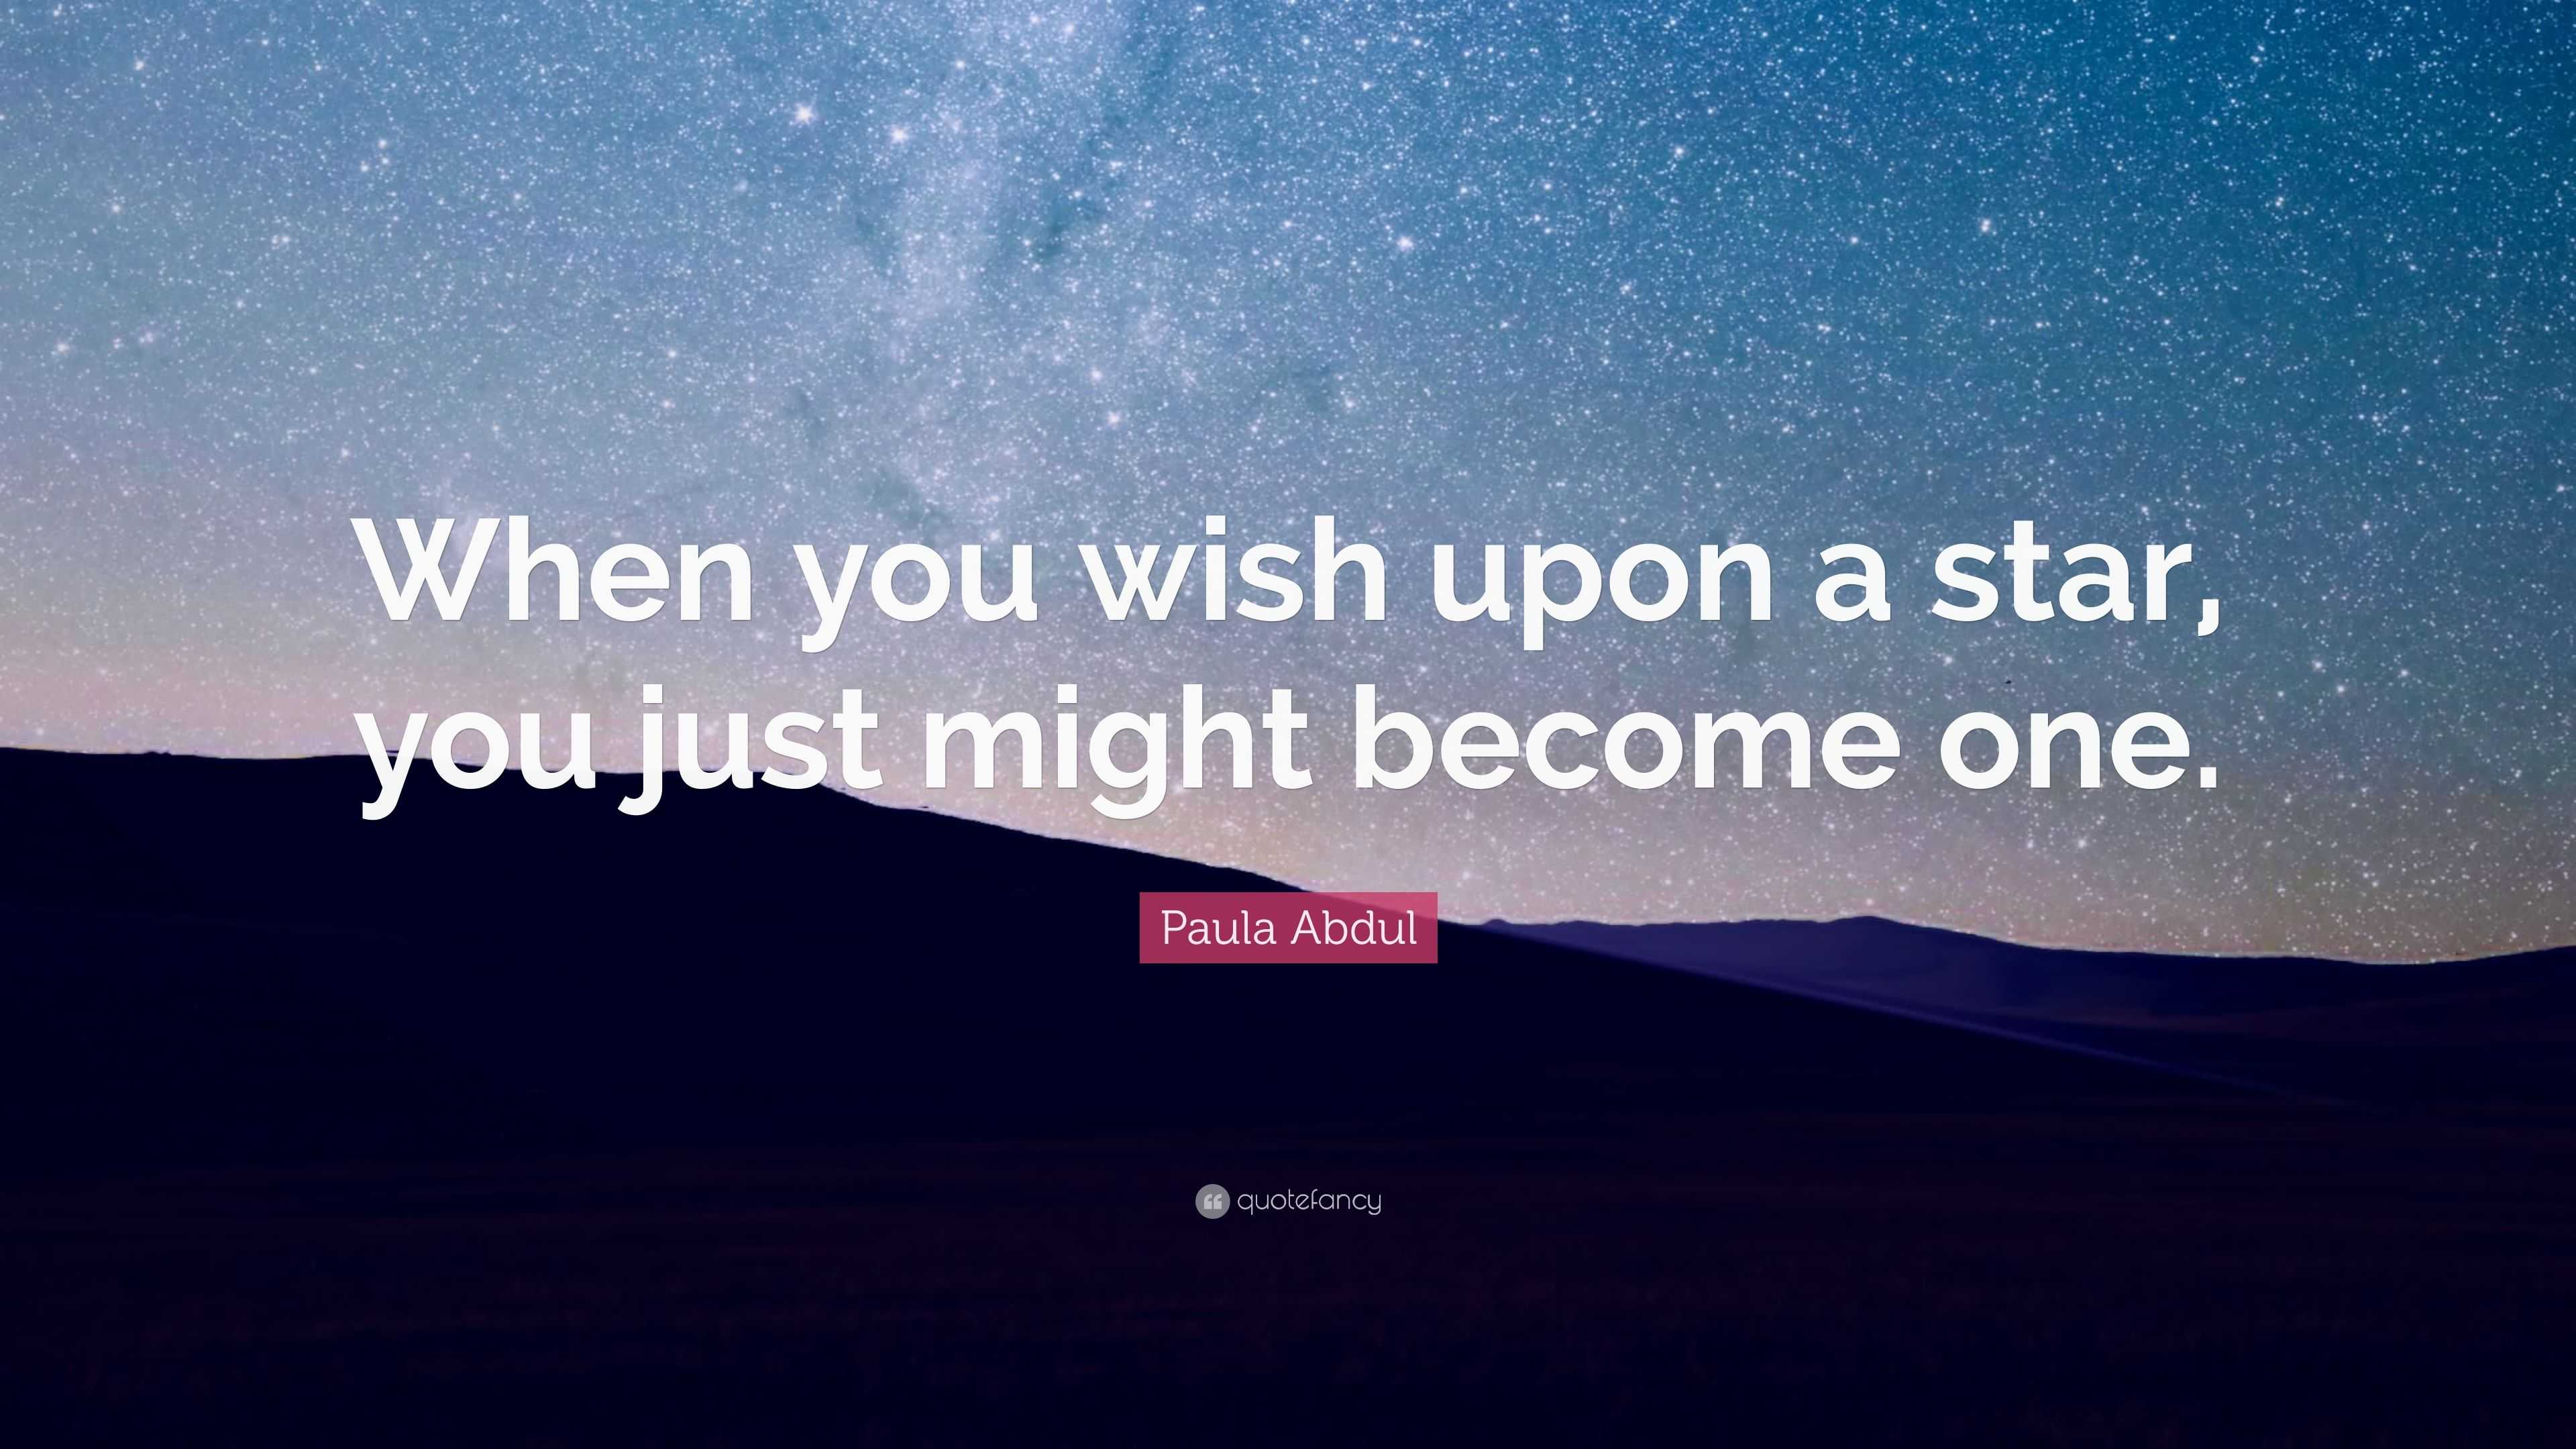 Paula Abdul Quote When You Wish Upon A Star You Just Might Become One